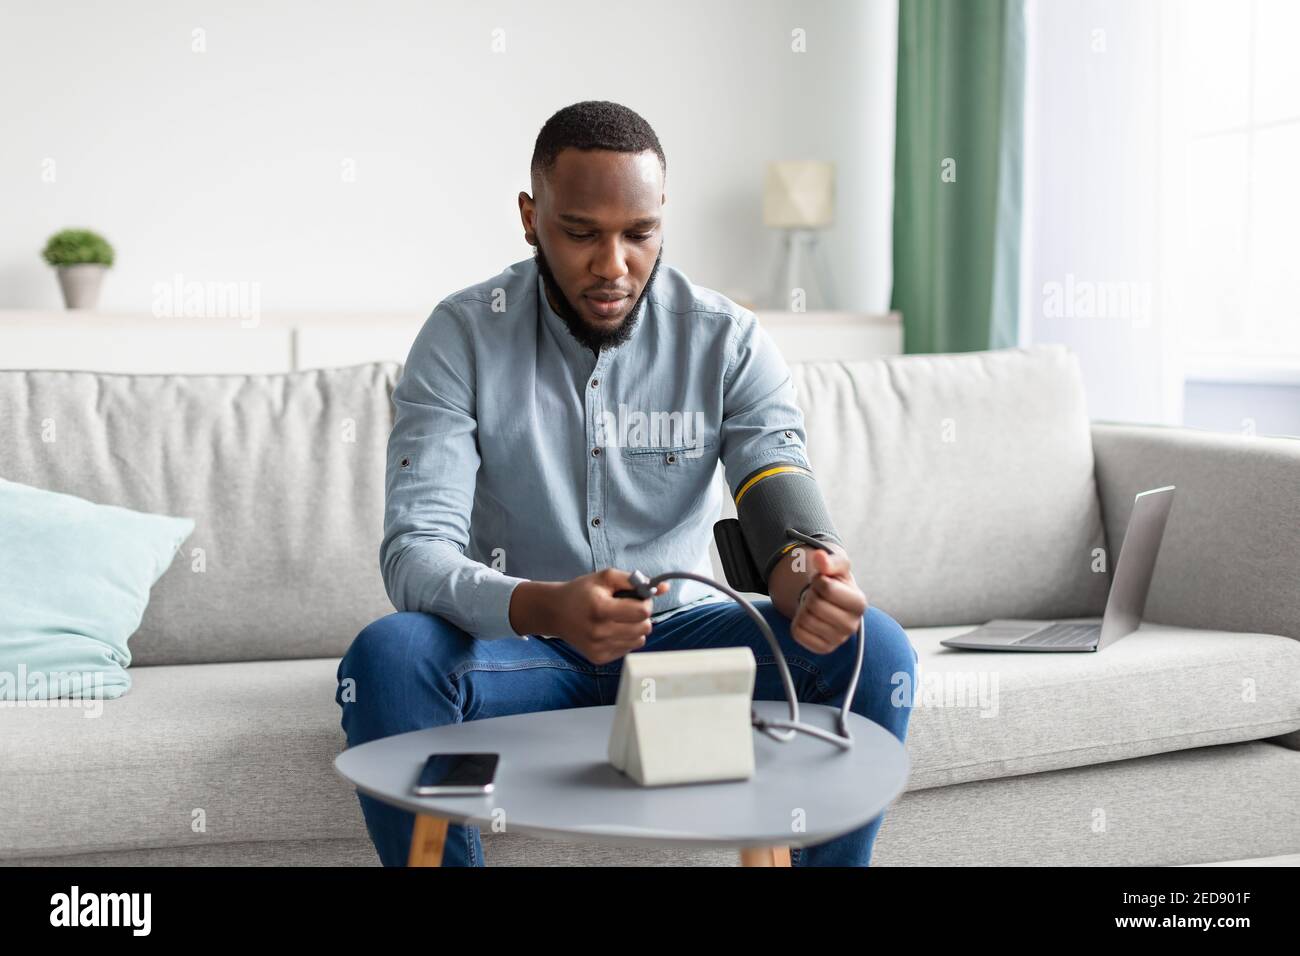 African Man Measuring Arterial Blood Pressure Sitting At Home Stock Photo